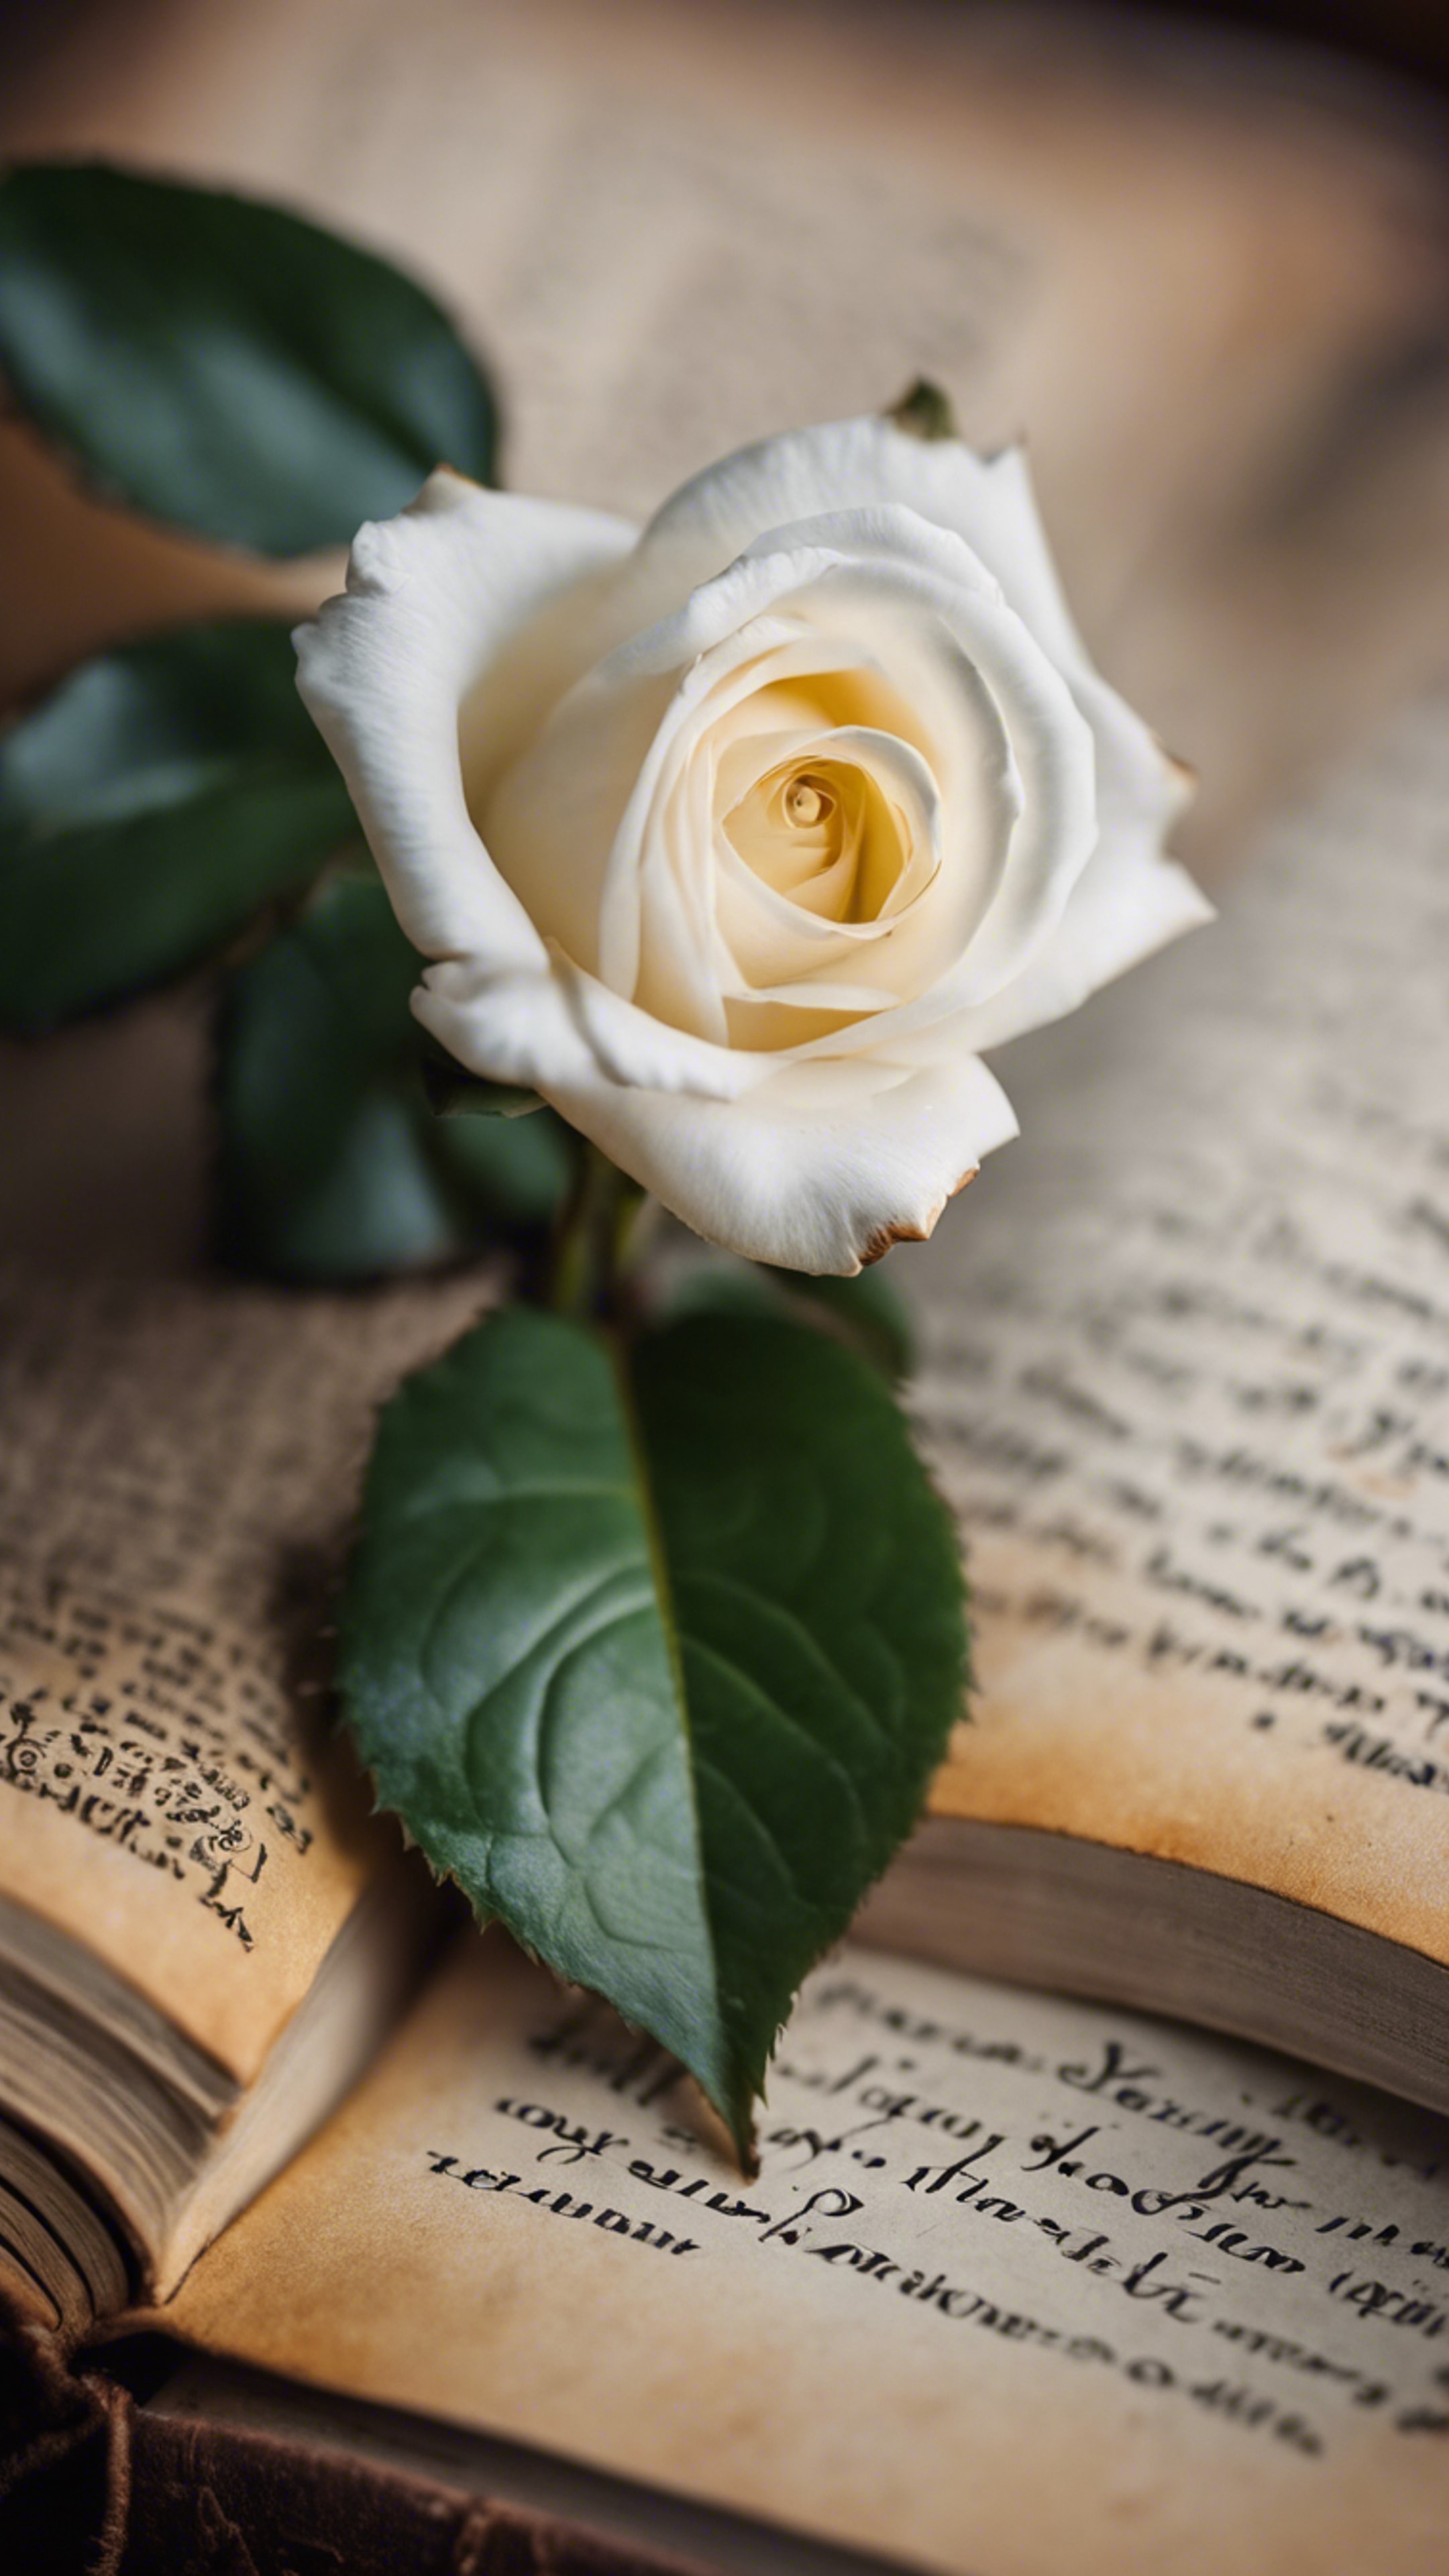 A tiny white rose peeping out of an antique book.壁紙[39c0dadc82f54673855a]